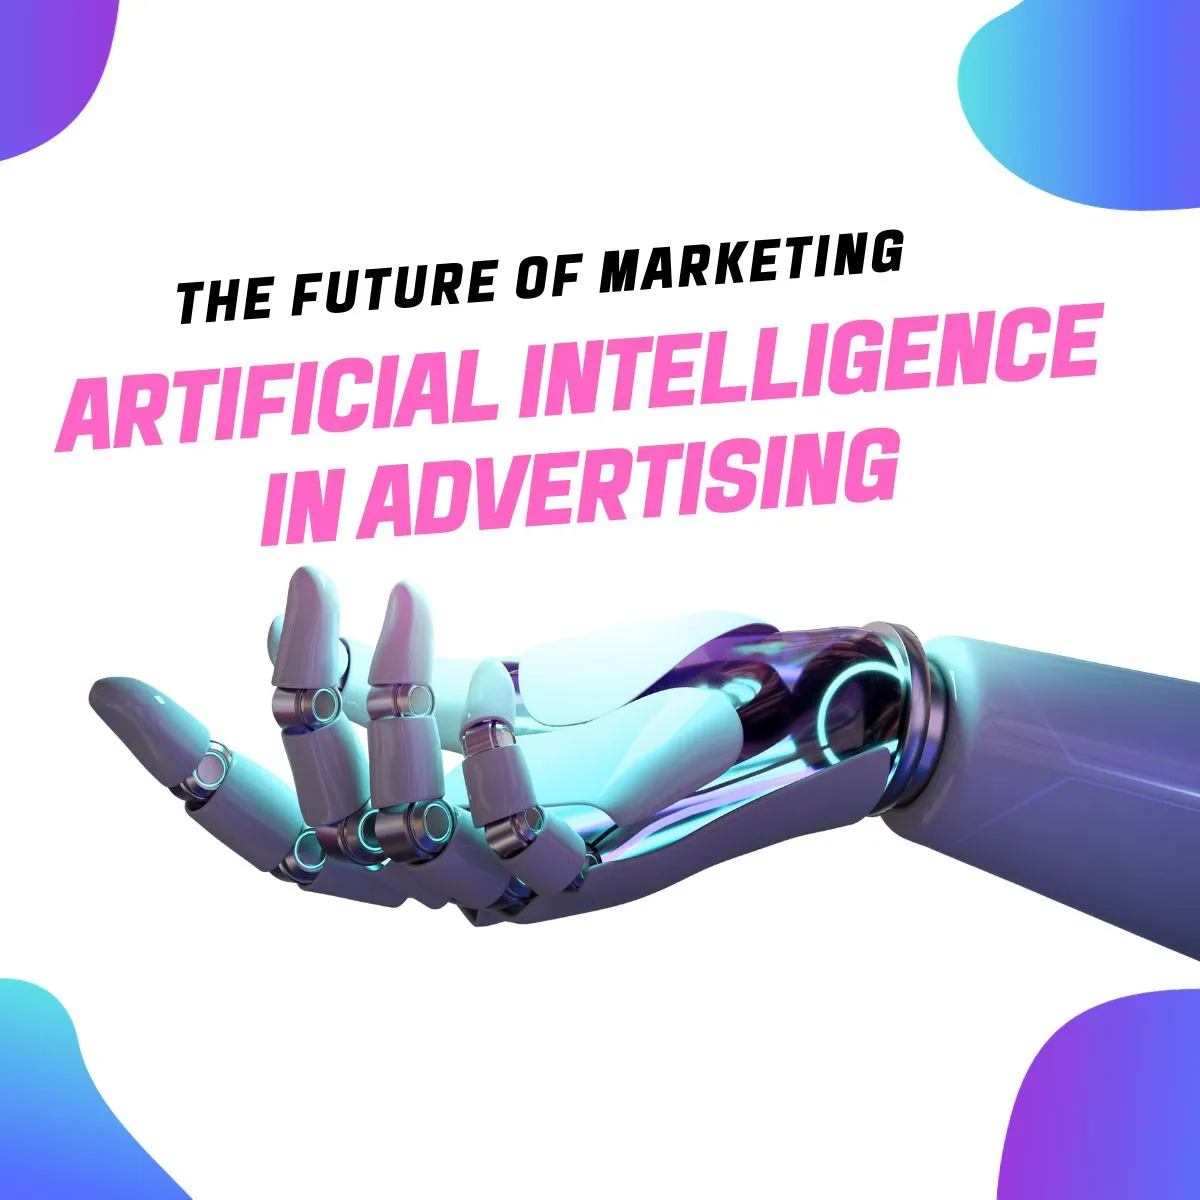 The Future of Marketing: Artificial Intelligence in Advertising